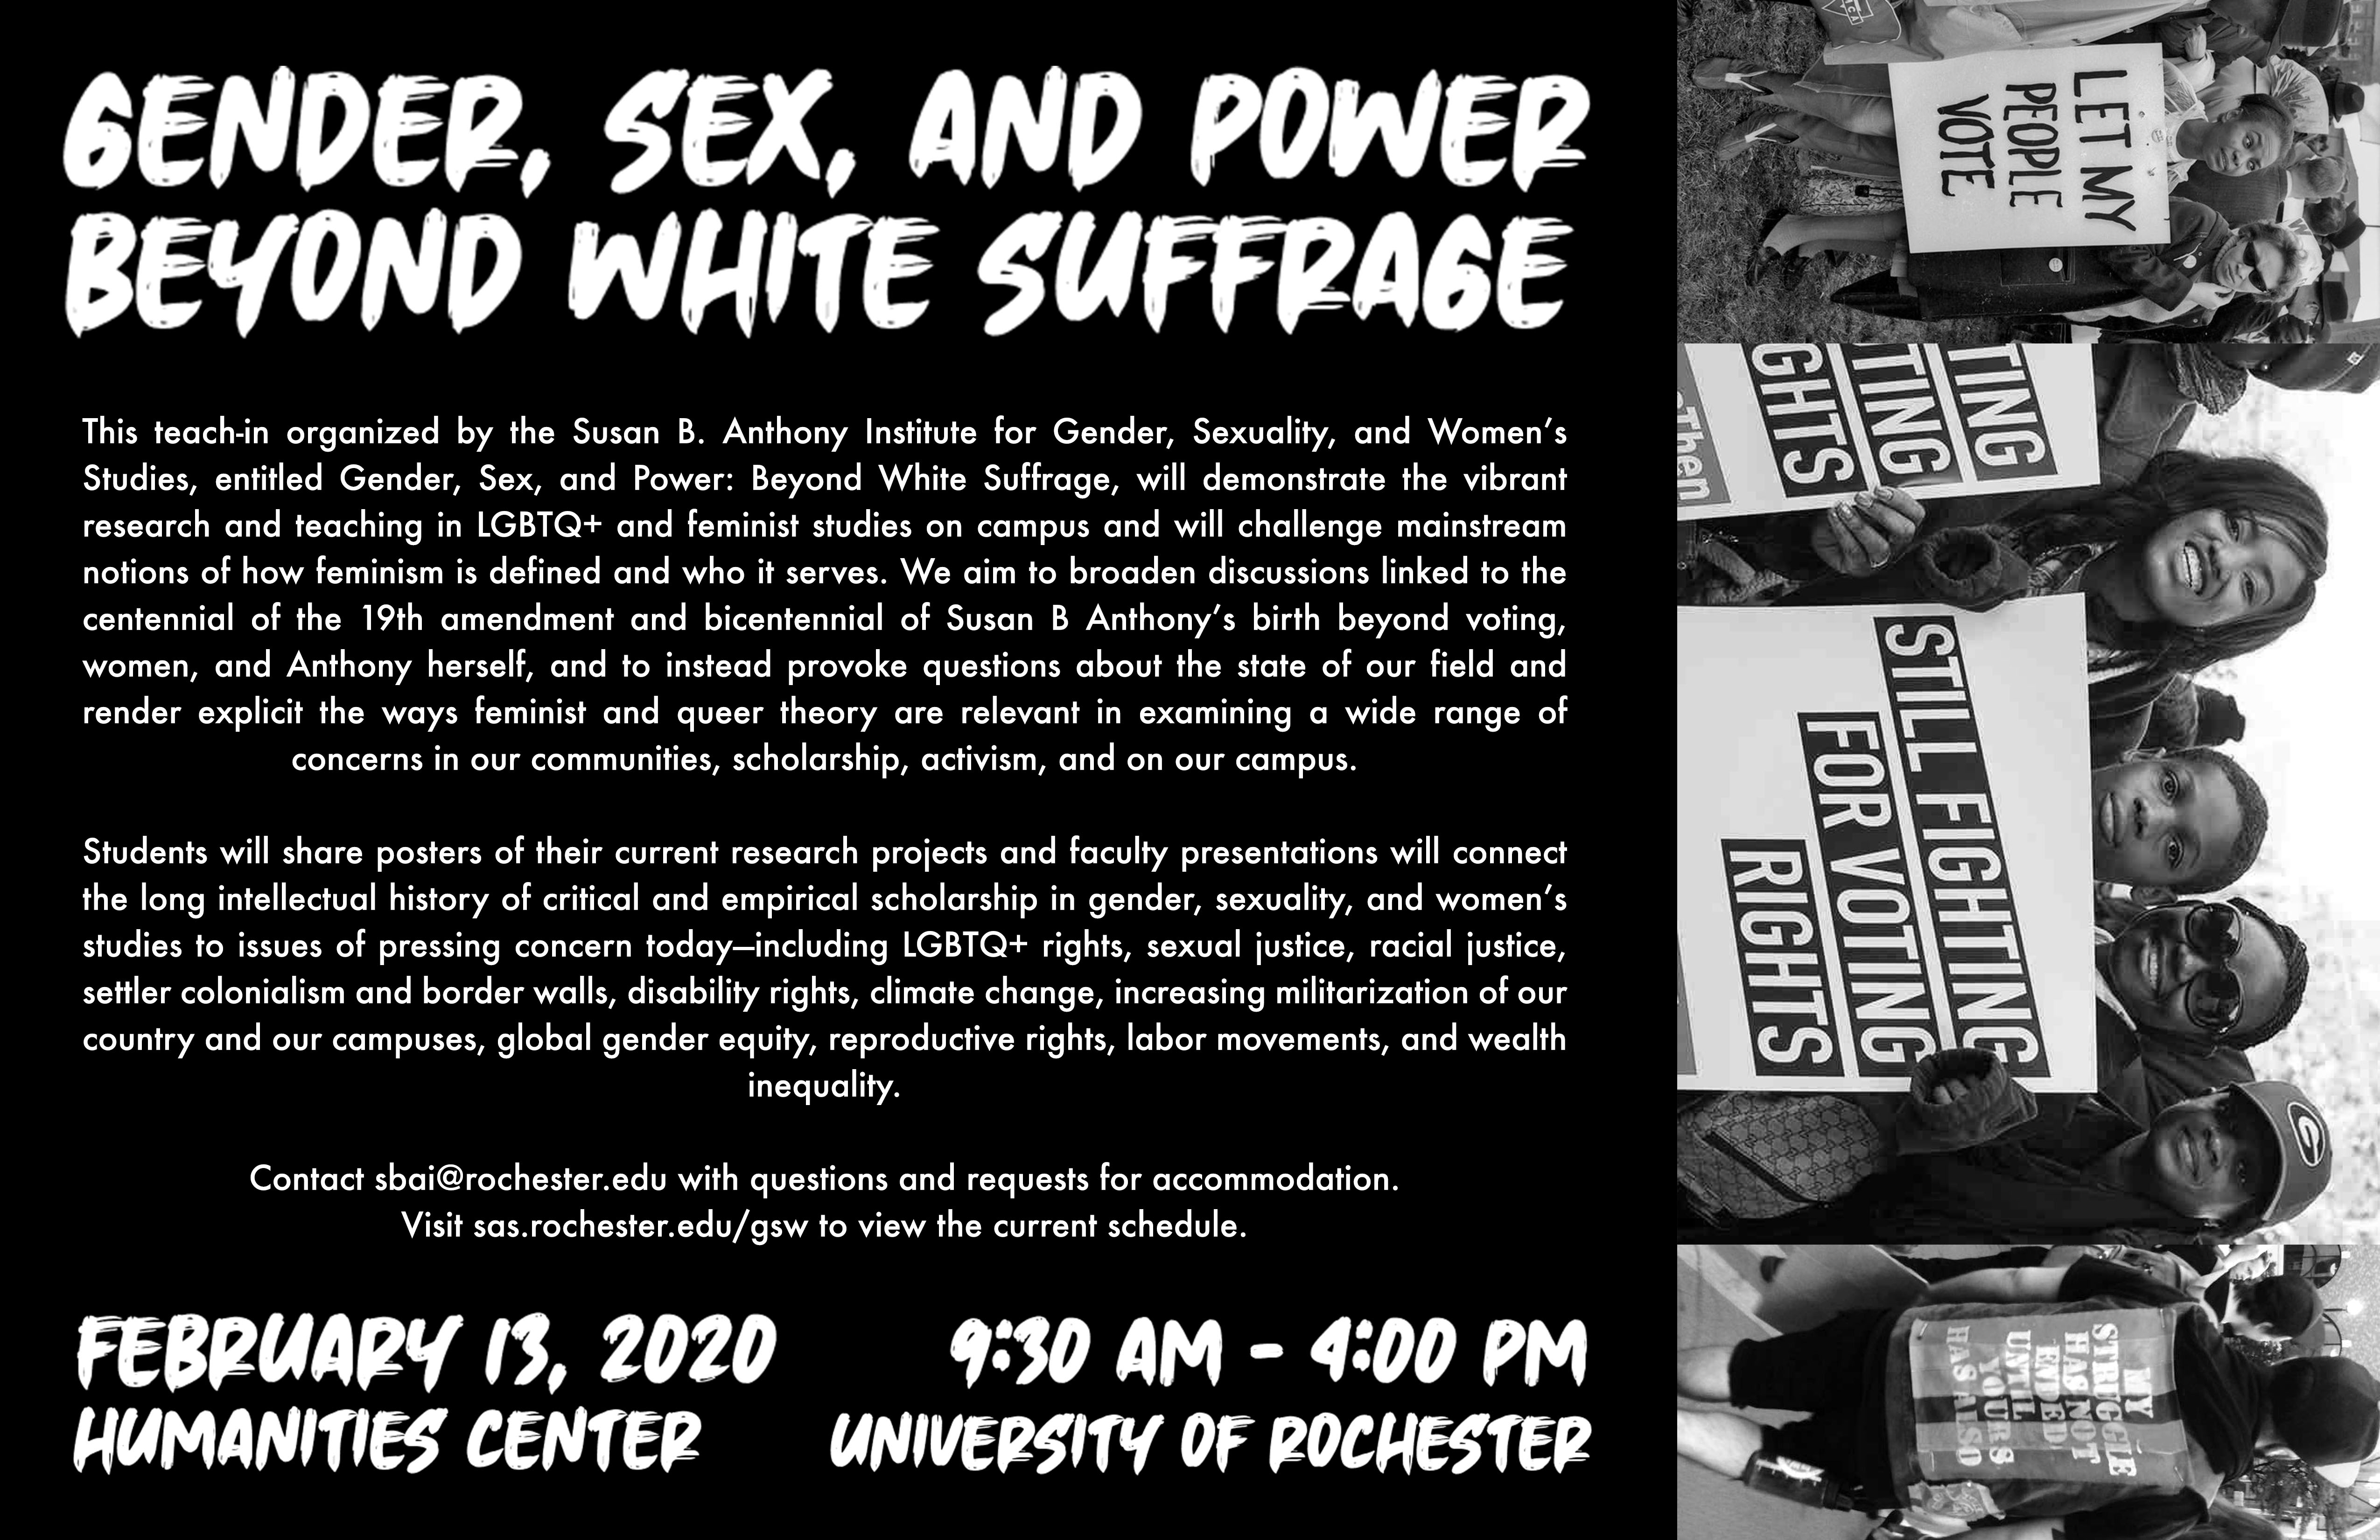 Poster for Teach-in event, with title of event and images of individuals at demonstrations holding signs